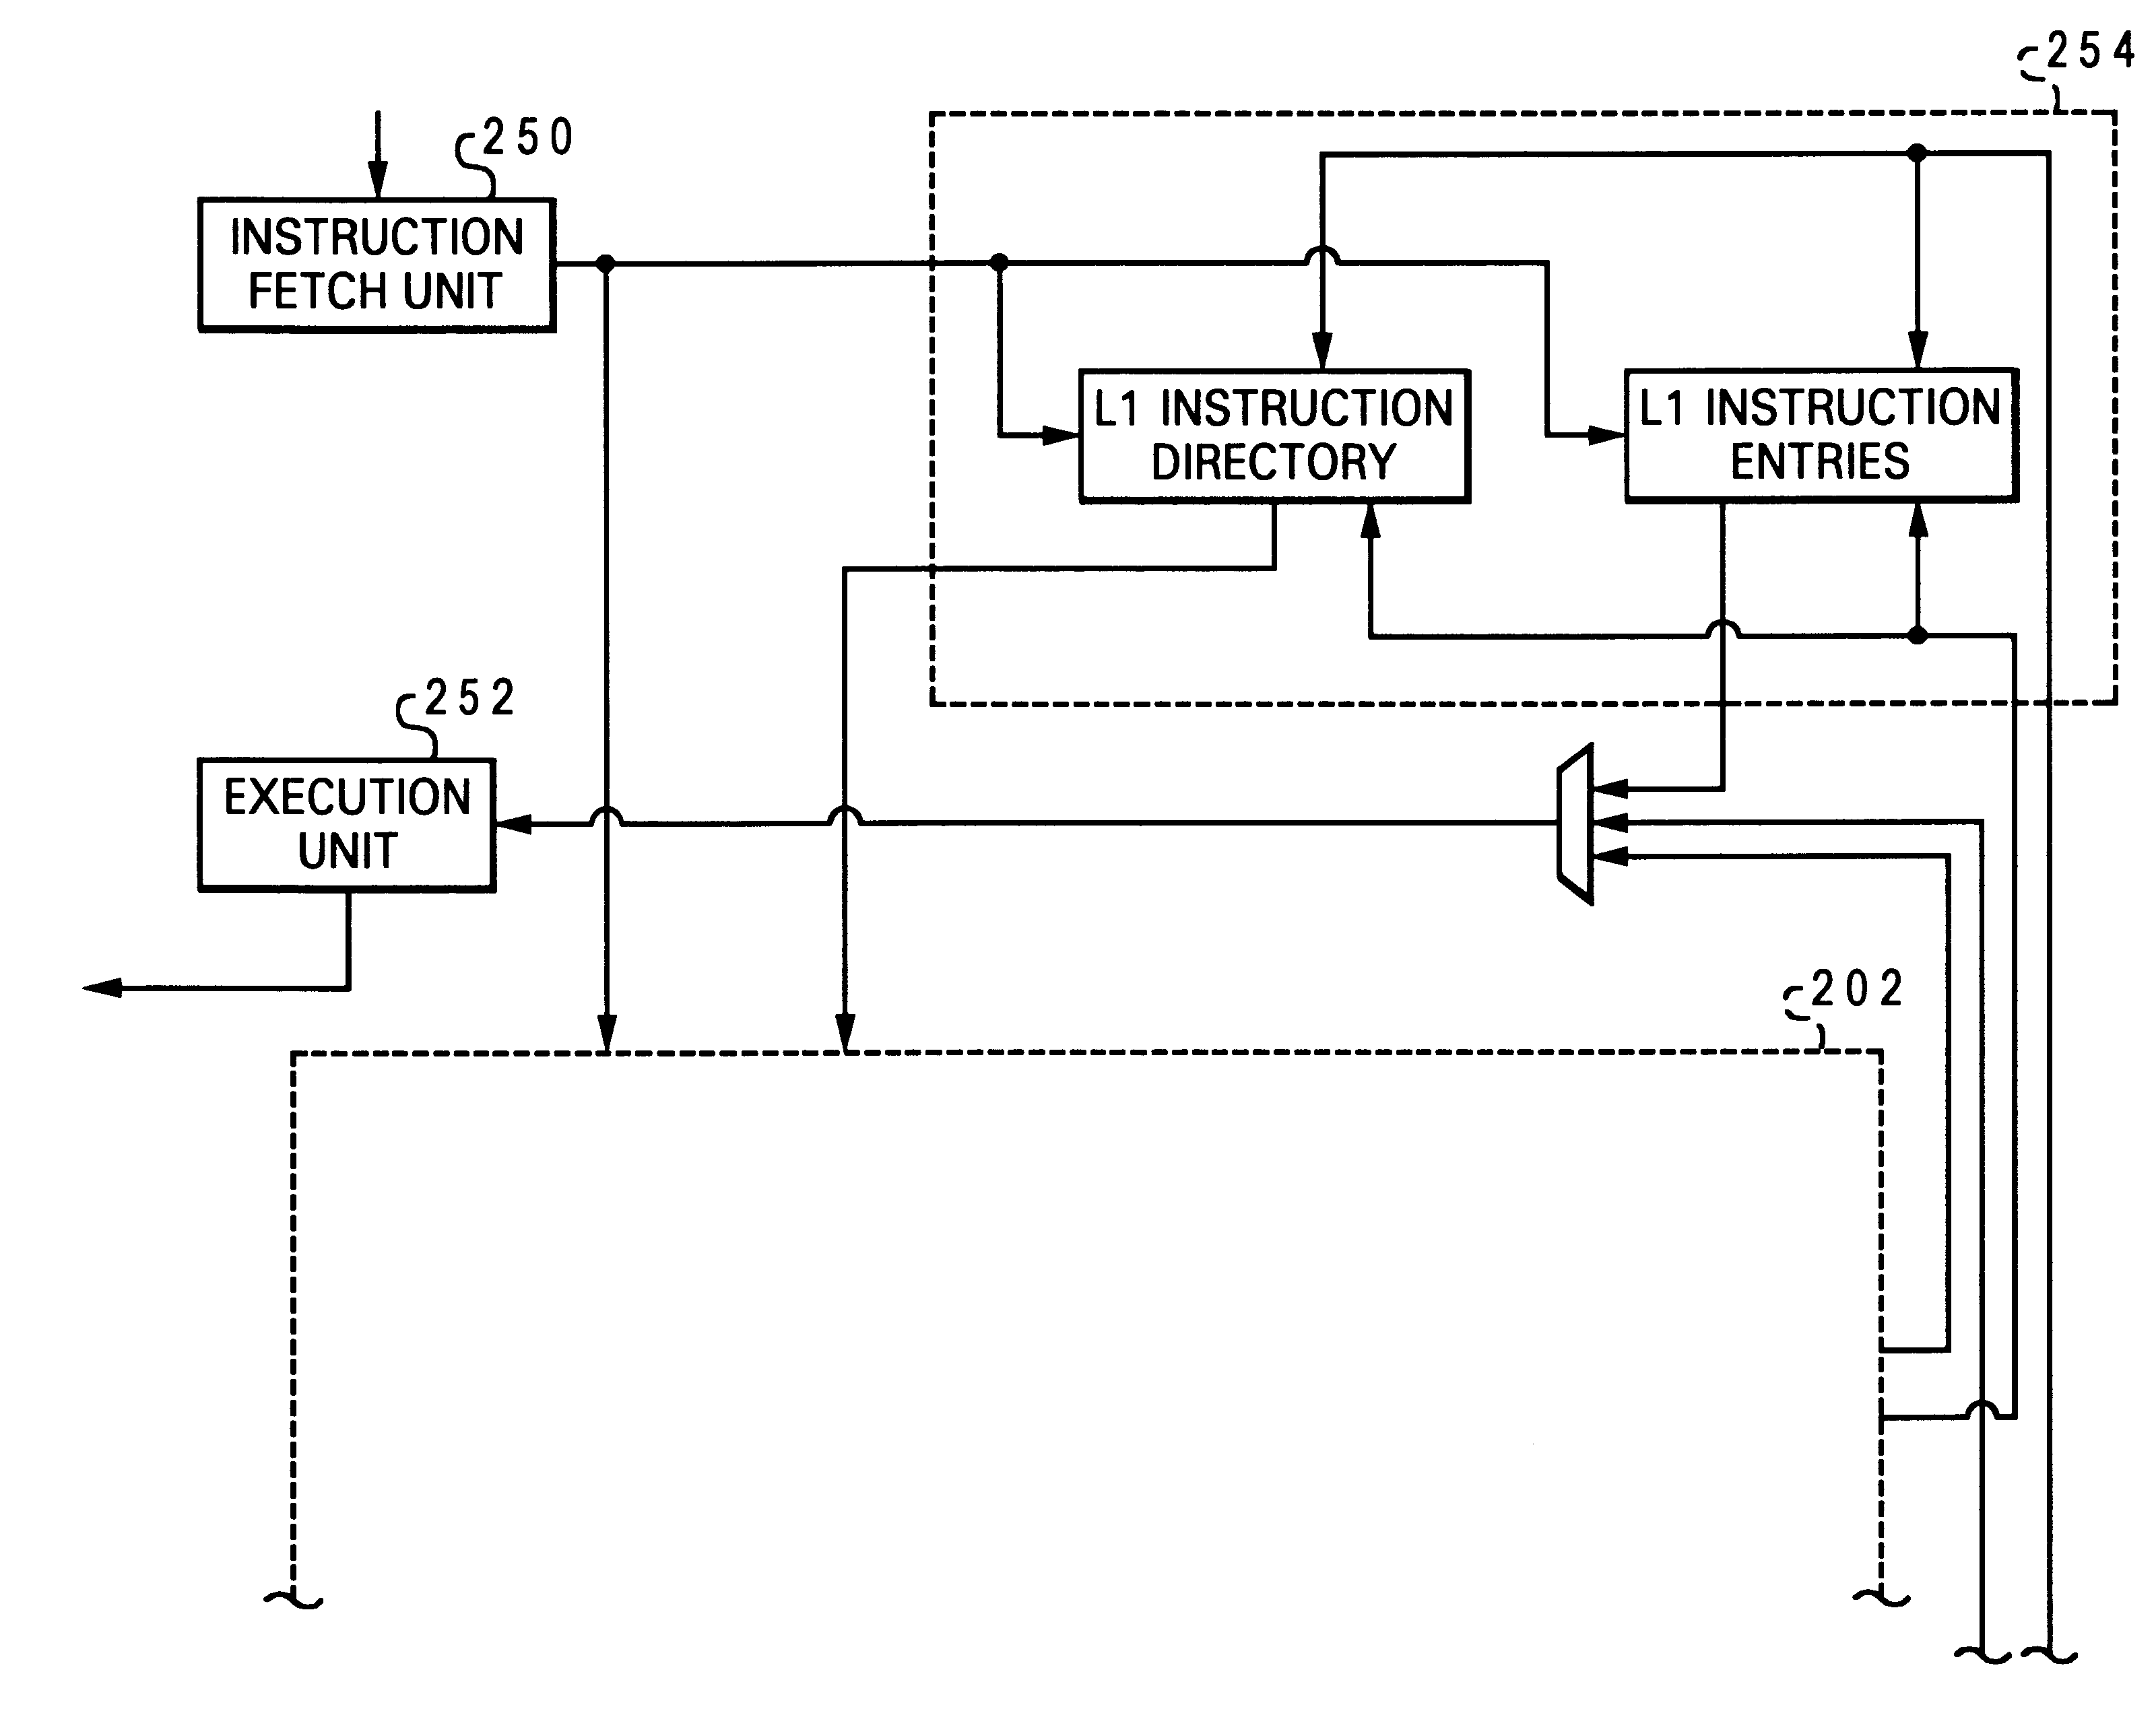 Layered local cache mechanism with split register load bus and cache load bus